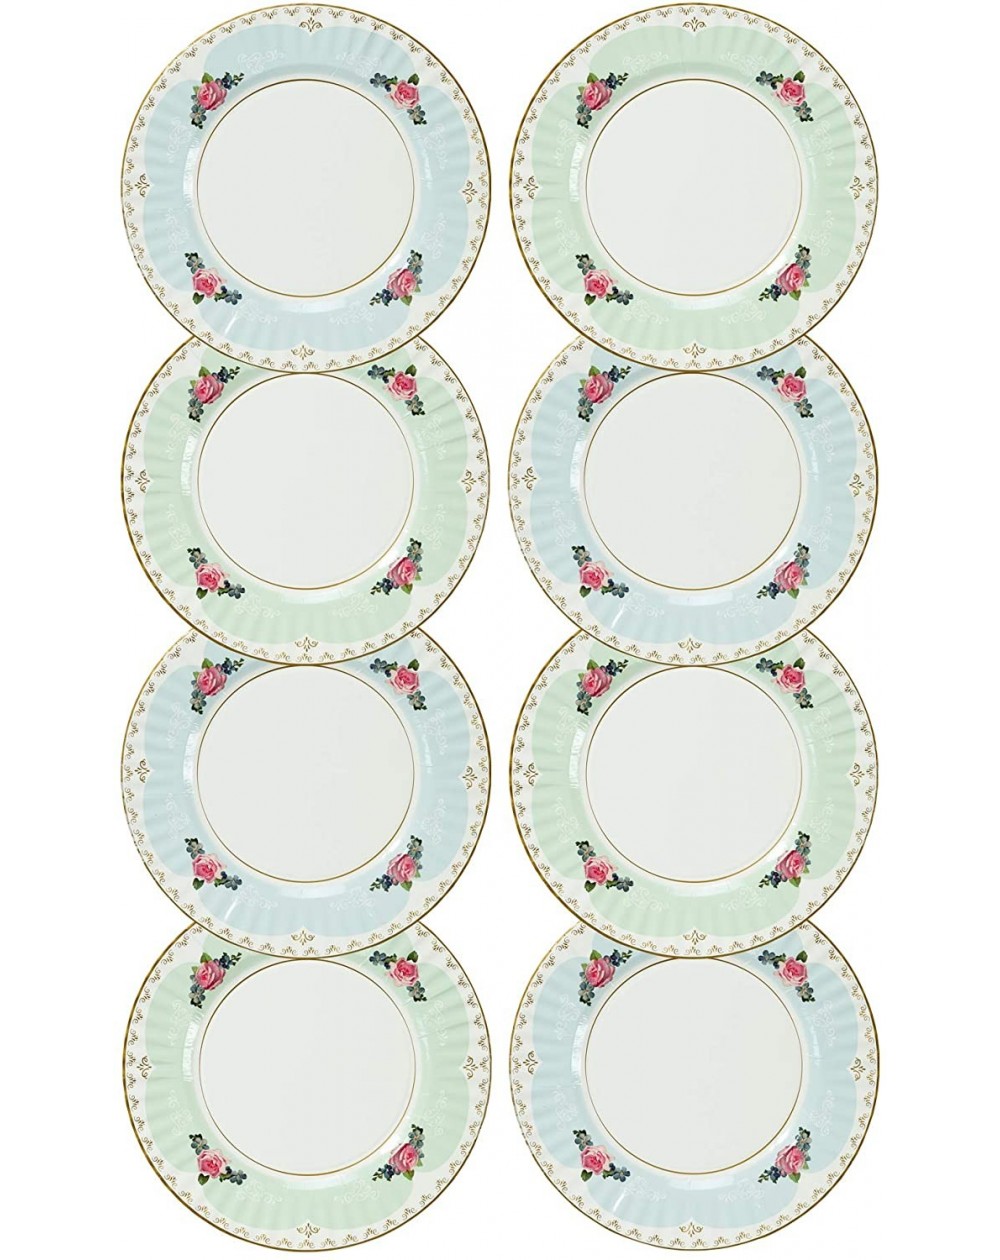 Tableware Truly Scrumptious Large Pastel Dinner Paper Plates for a Tea Party- Wedding or Birthday- Blue/Green - CY12BXWATPZ $...